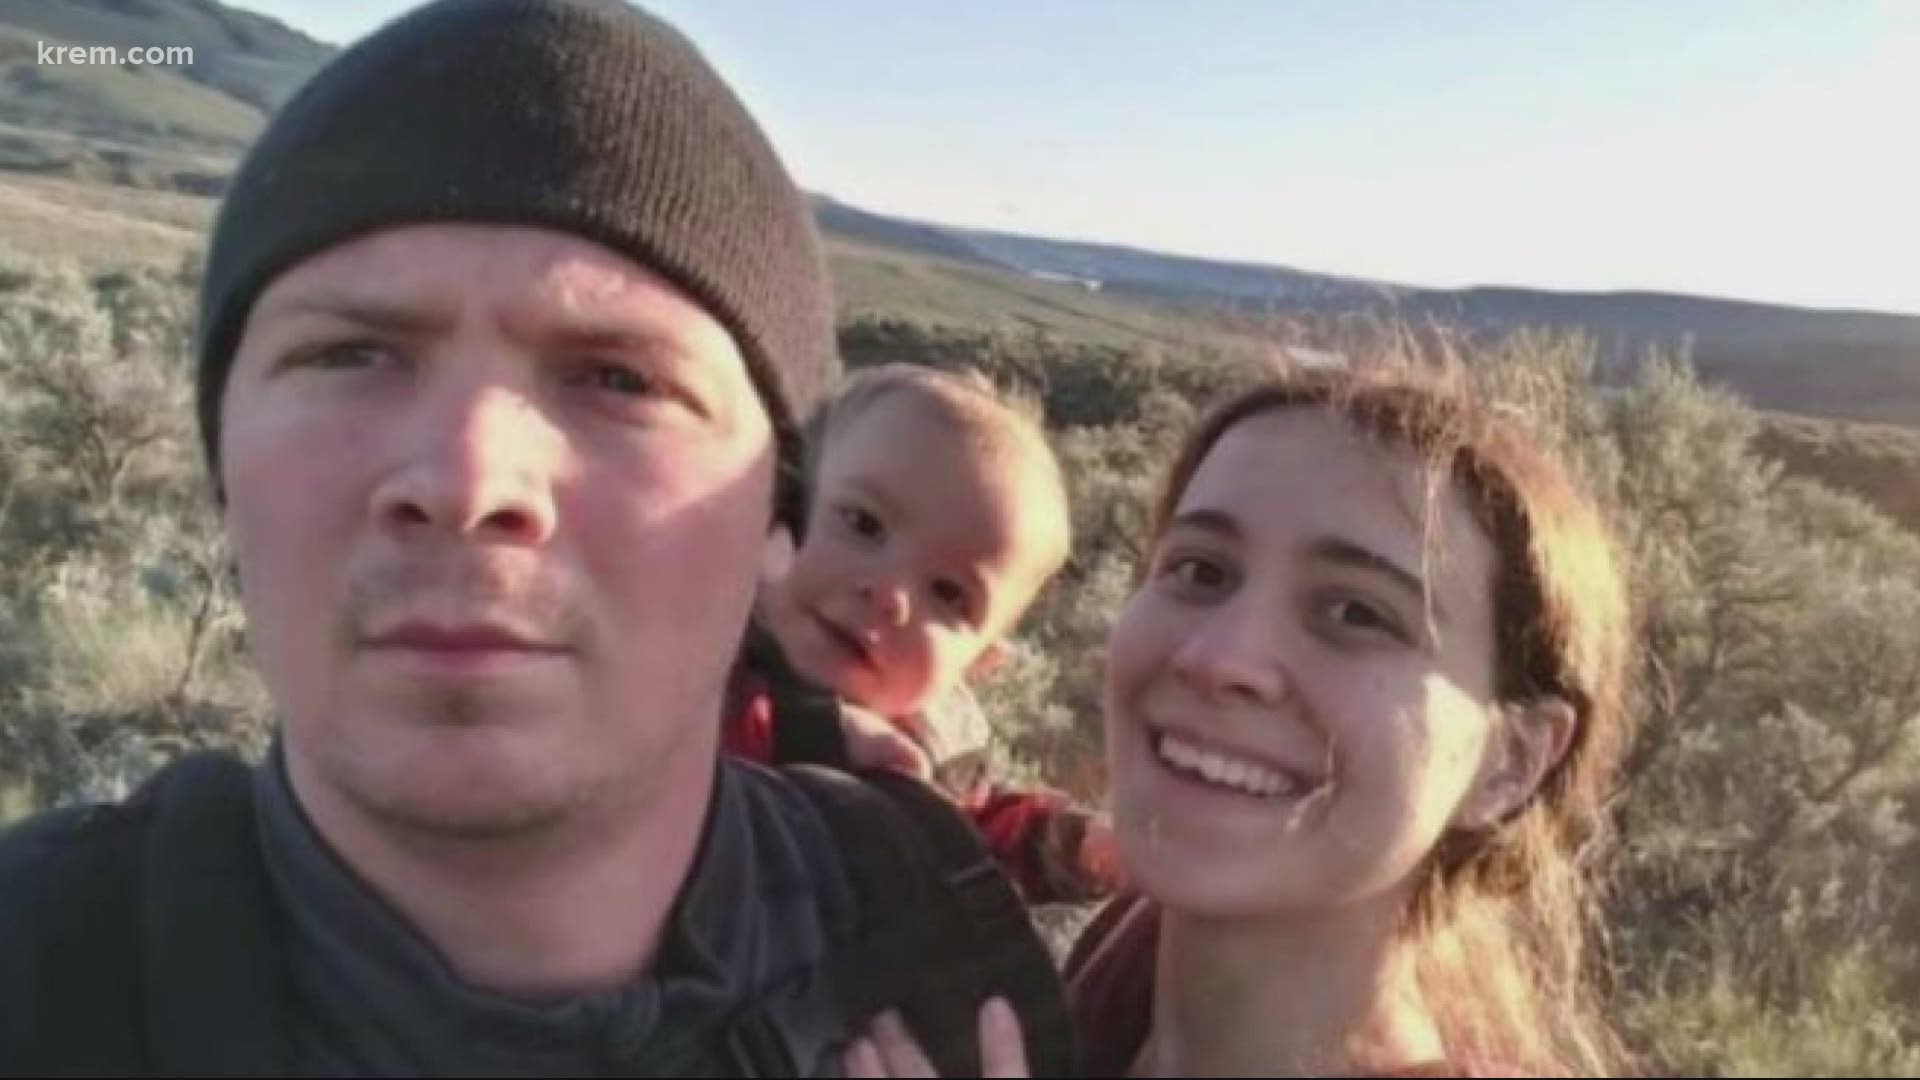 Jacob and Jamie Hyland were trying to leave their property to get away from the Cold Springs Fire burning in Okanogan County, authorities said.